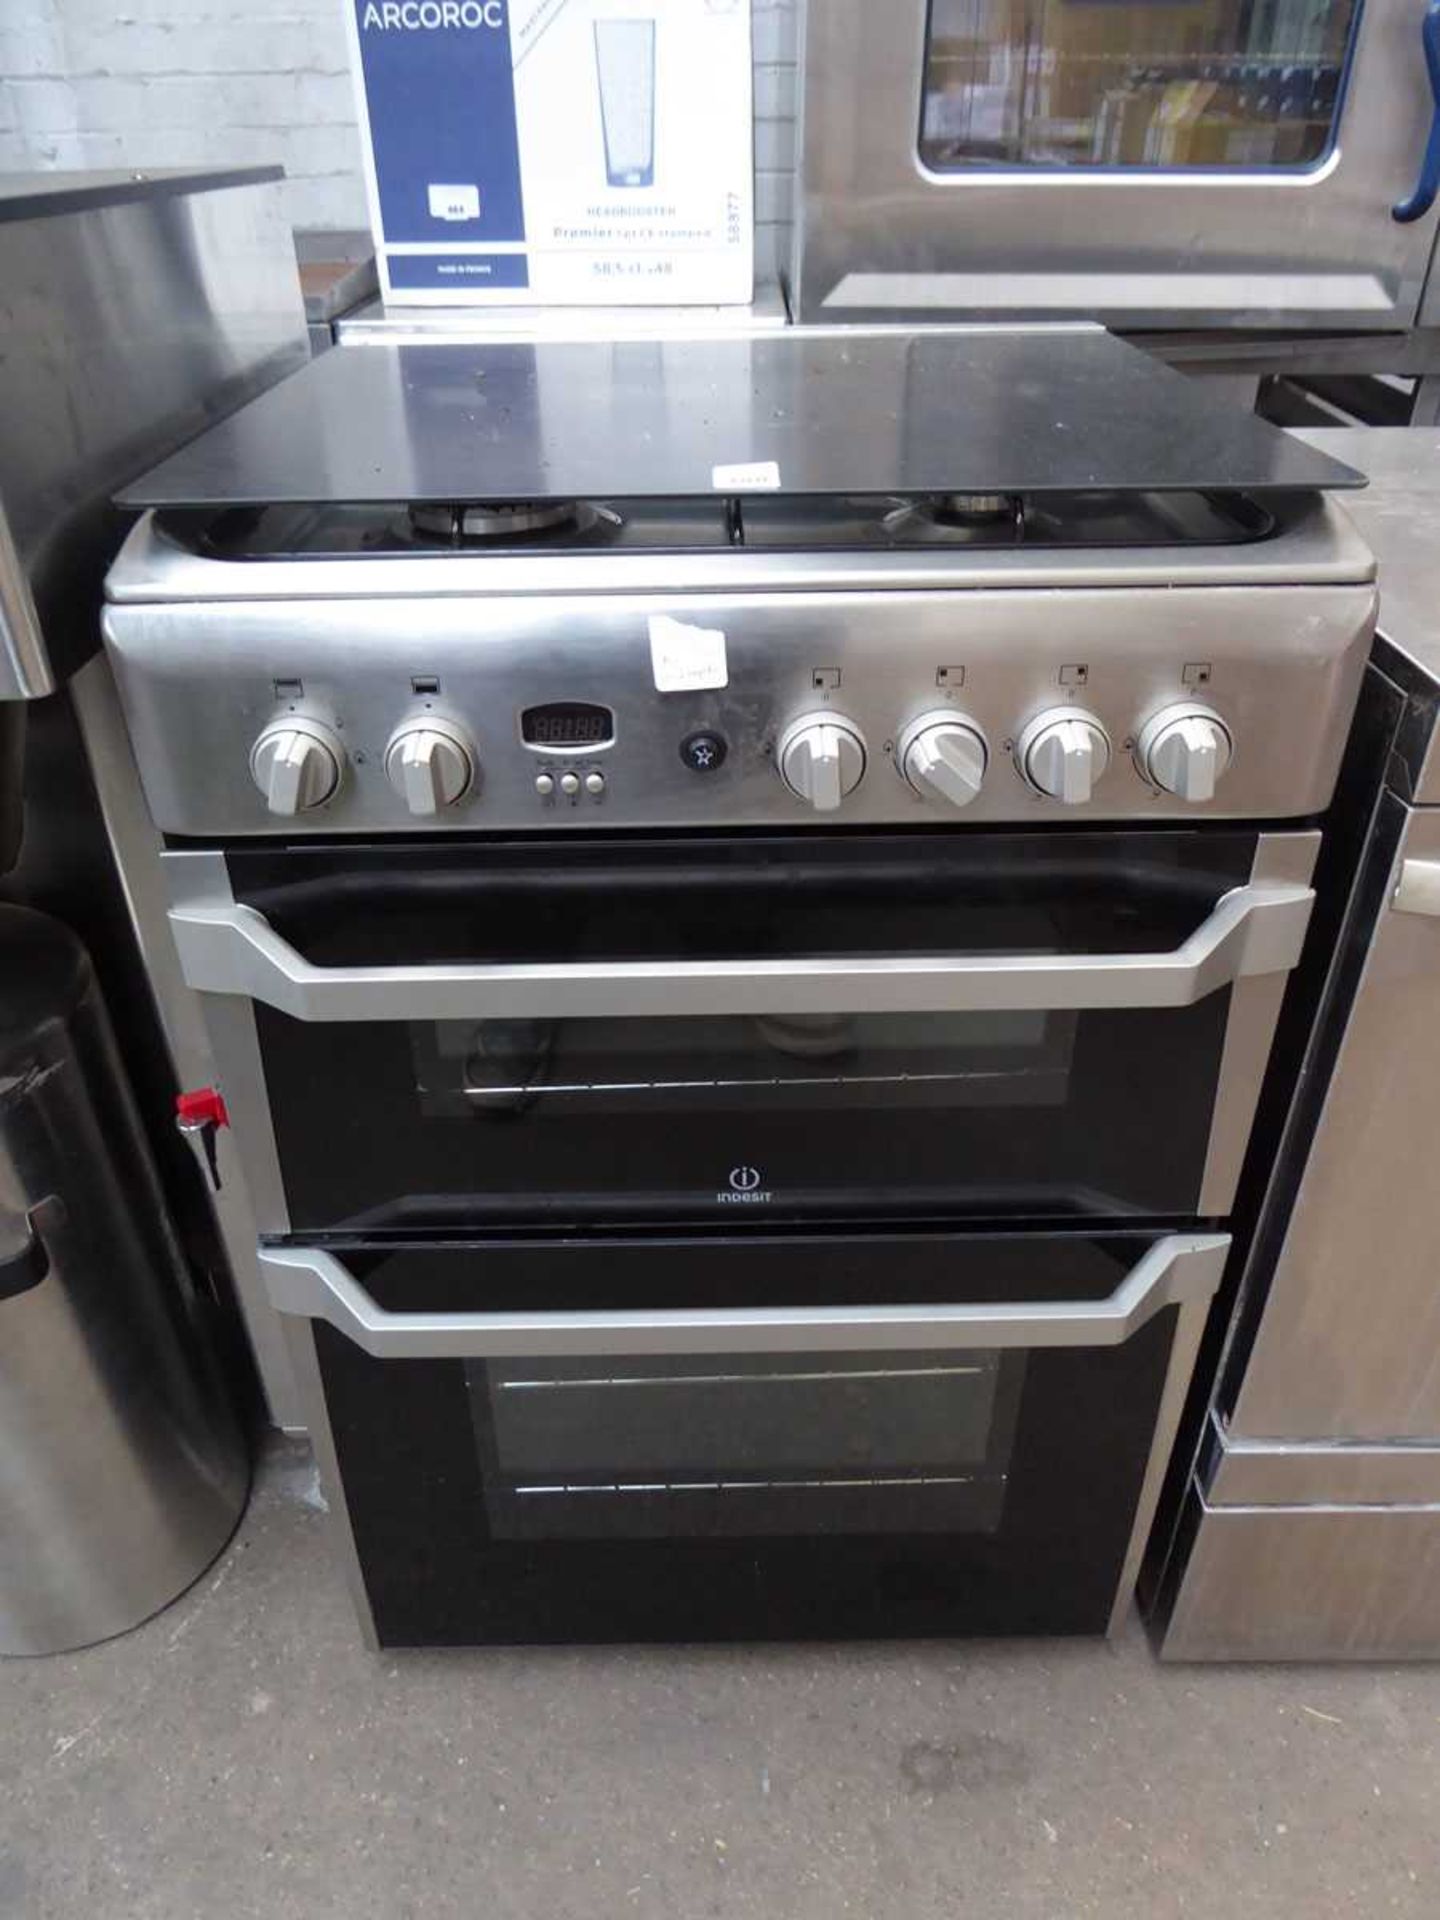 60cm gas domestic Indesit cooker with 4 burner top and and 2 ovens under